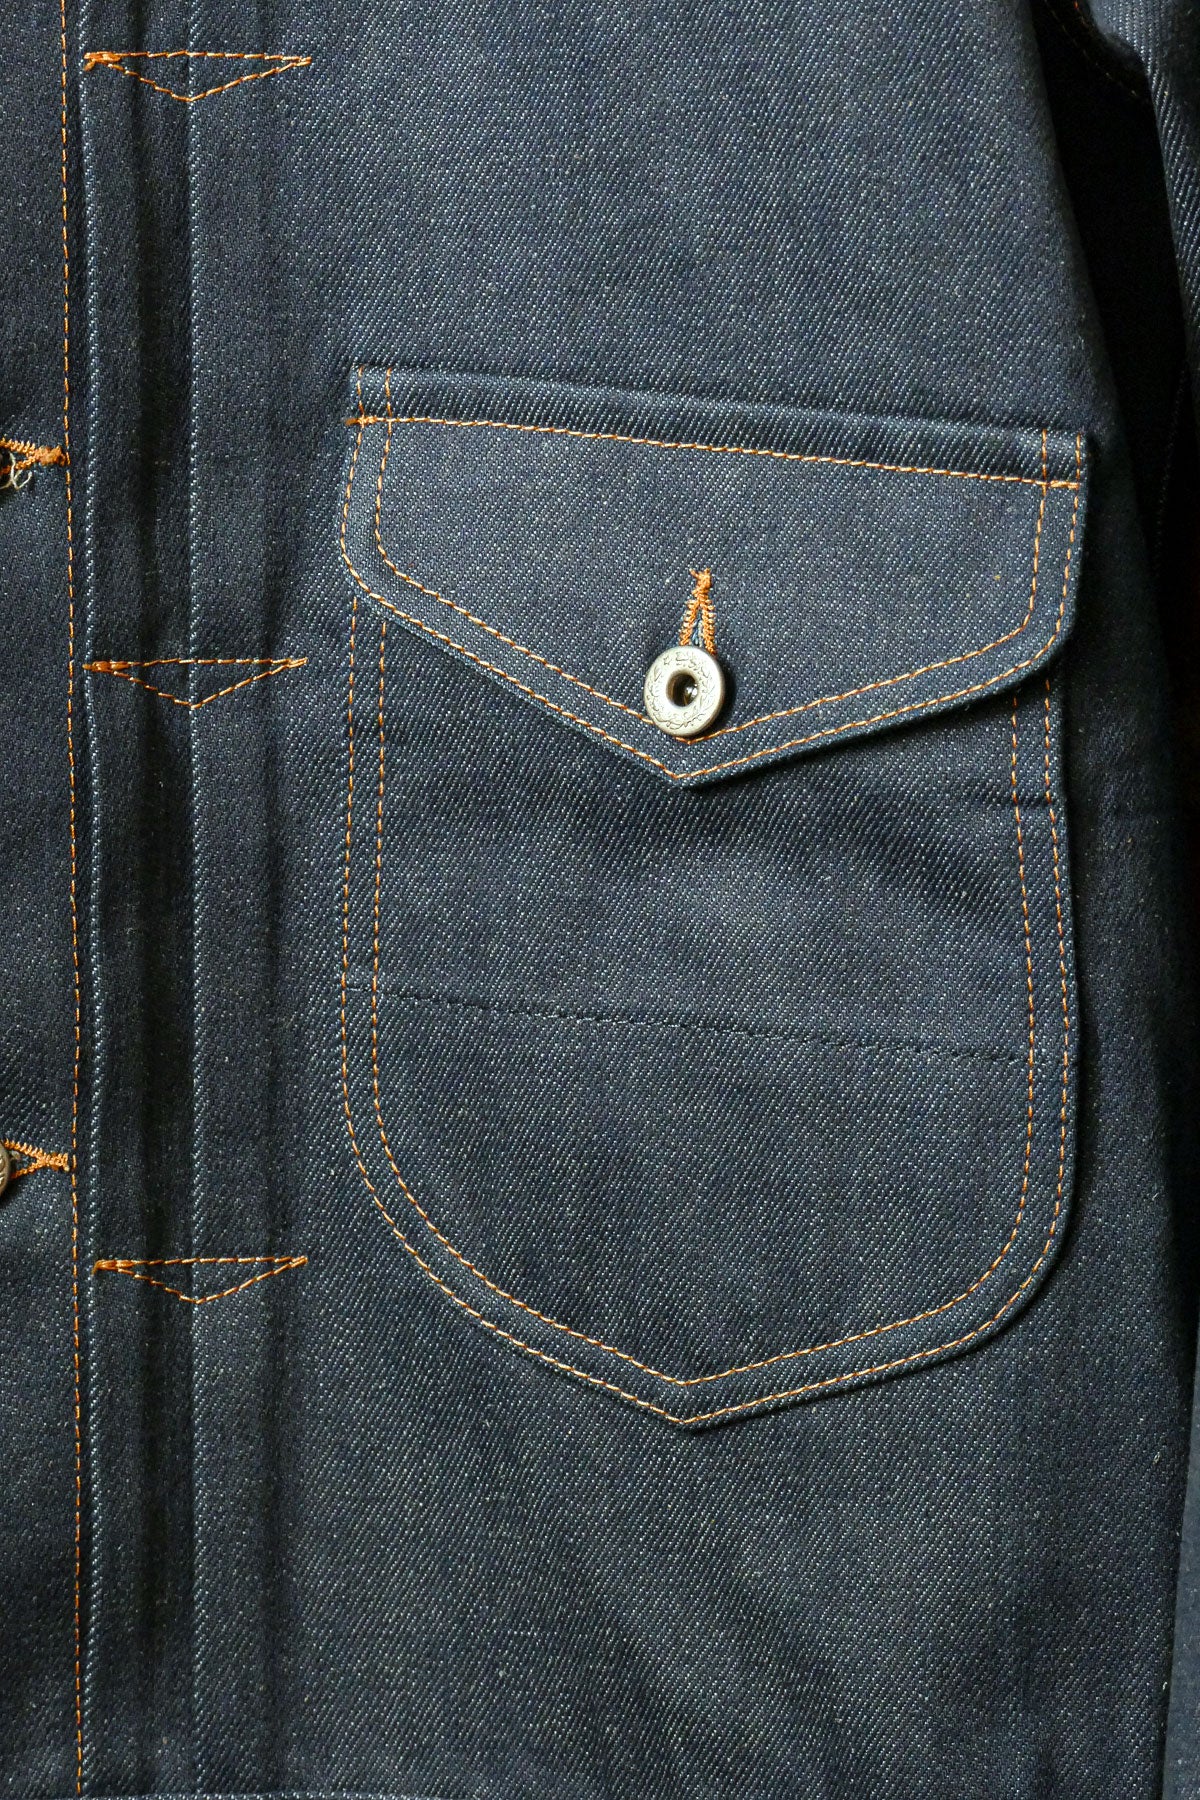 For the biggest selection of selvedge denim brands buy @Union Clothing |  Union Clothing